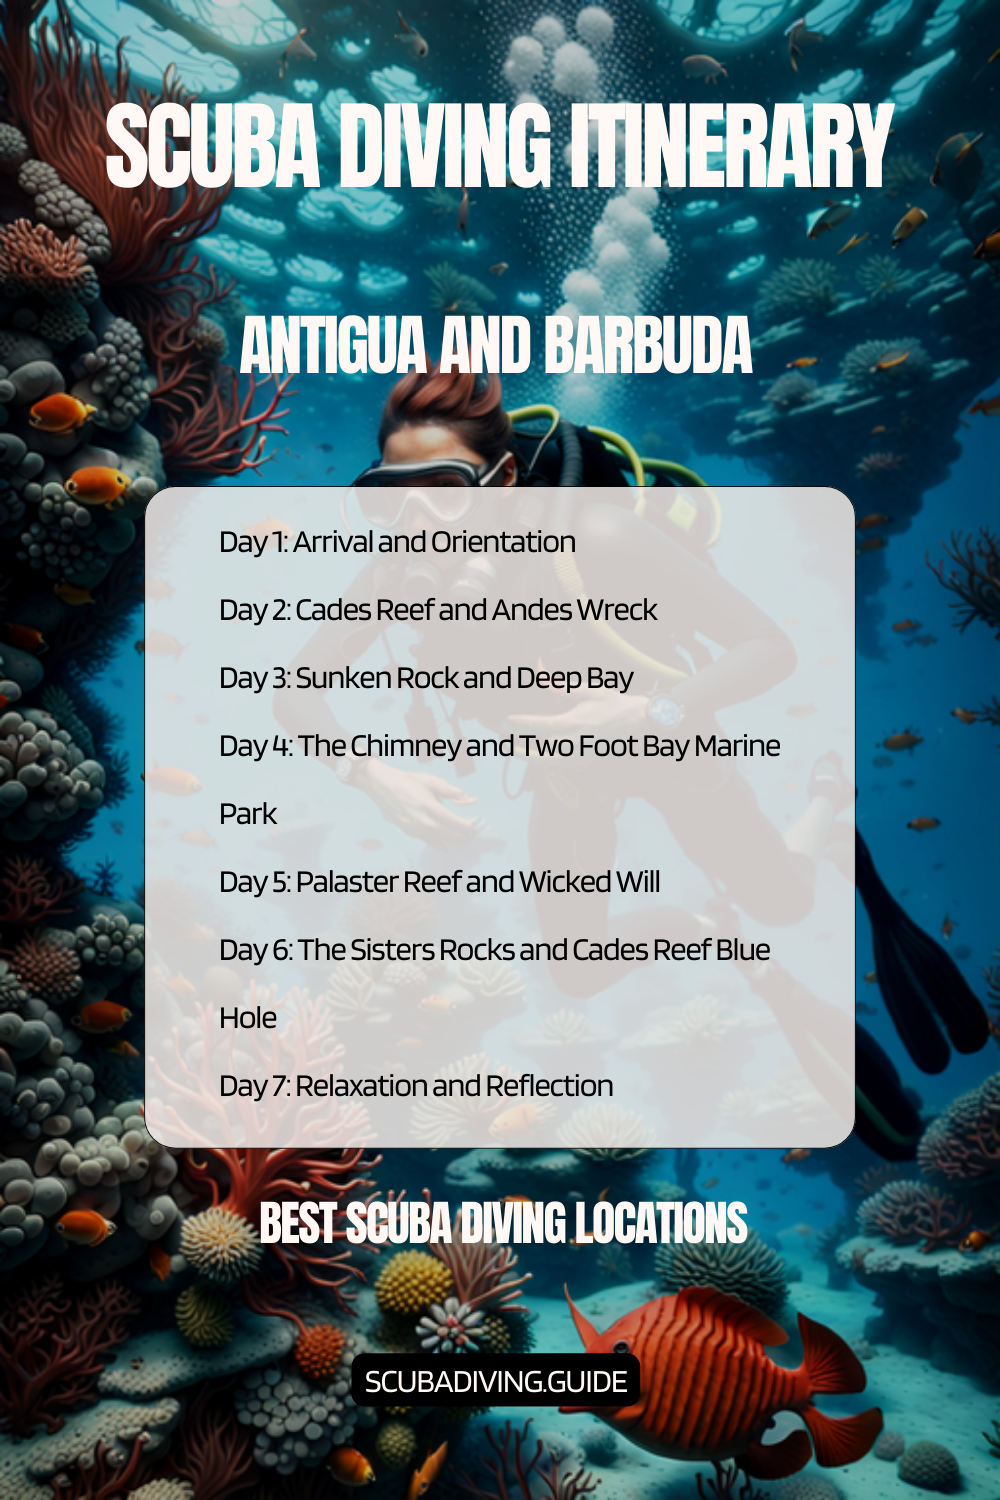 Antigua and Barbuda Recommended Scuba Diving Itinerary